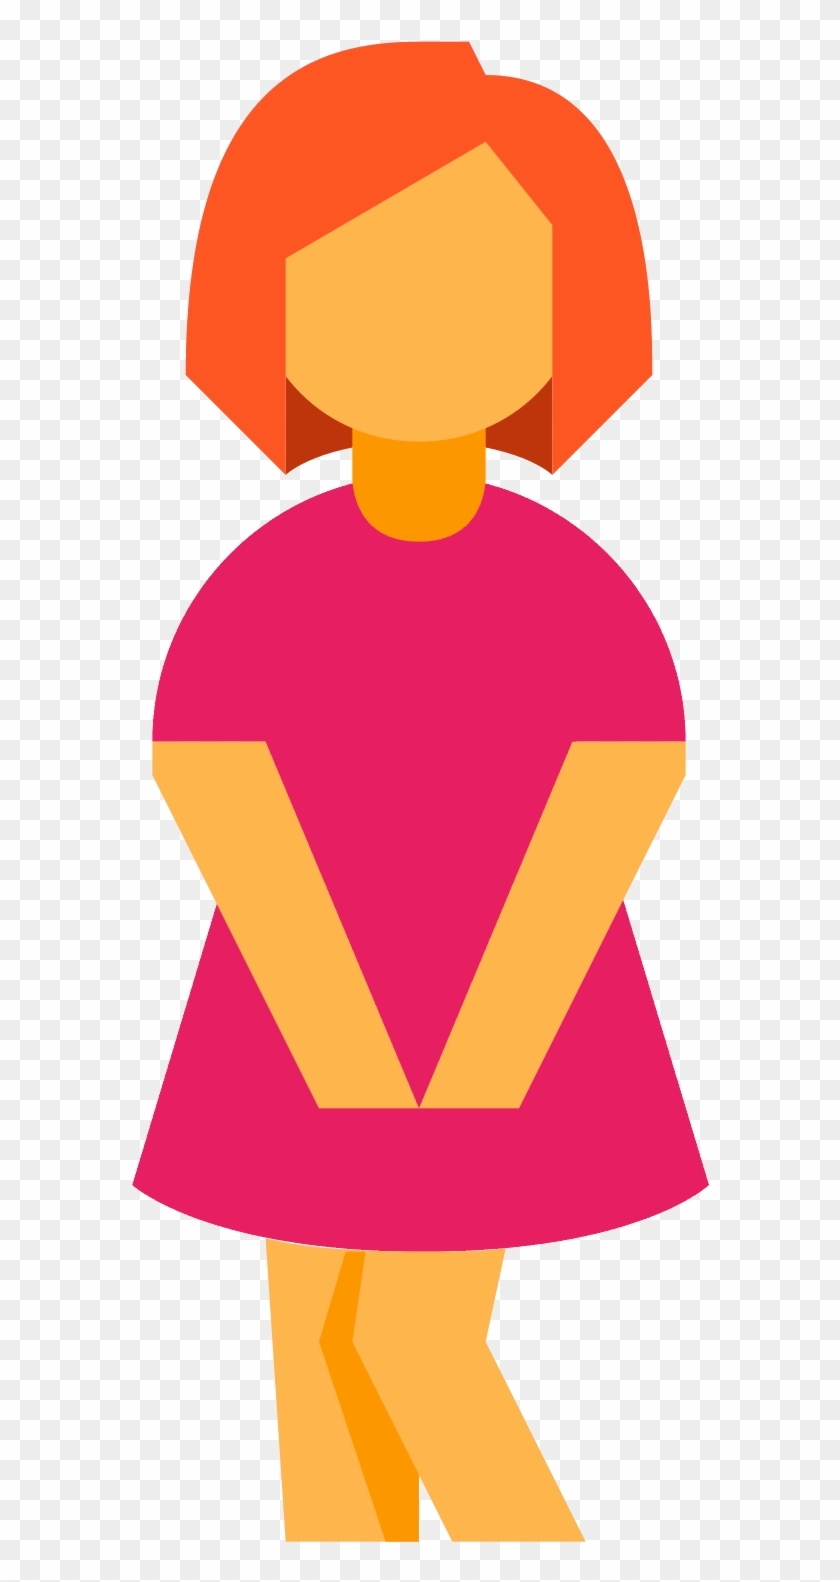 There Is A Woman In A Dress Who Has Her Legs Crossed - Xixi Icon Png #1296092